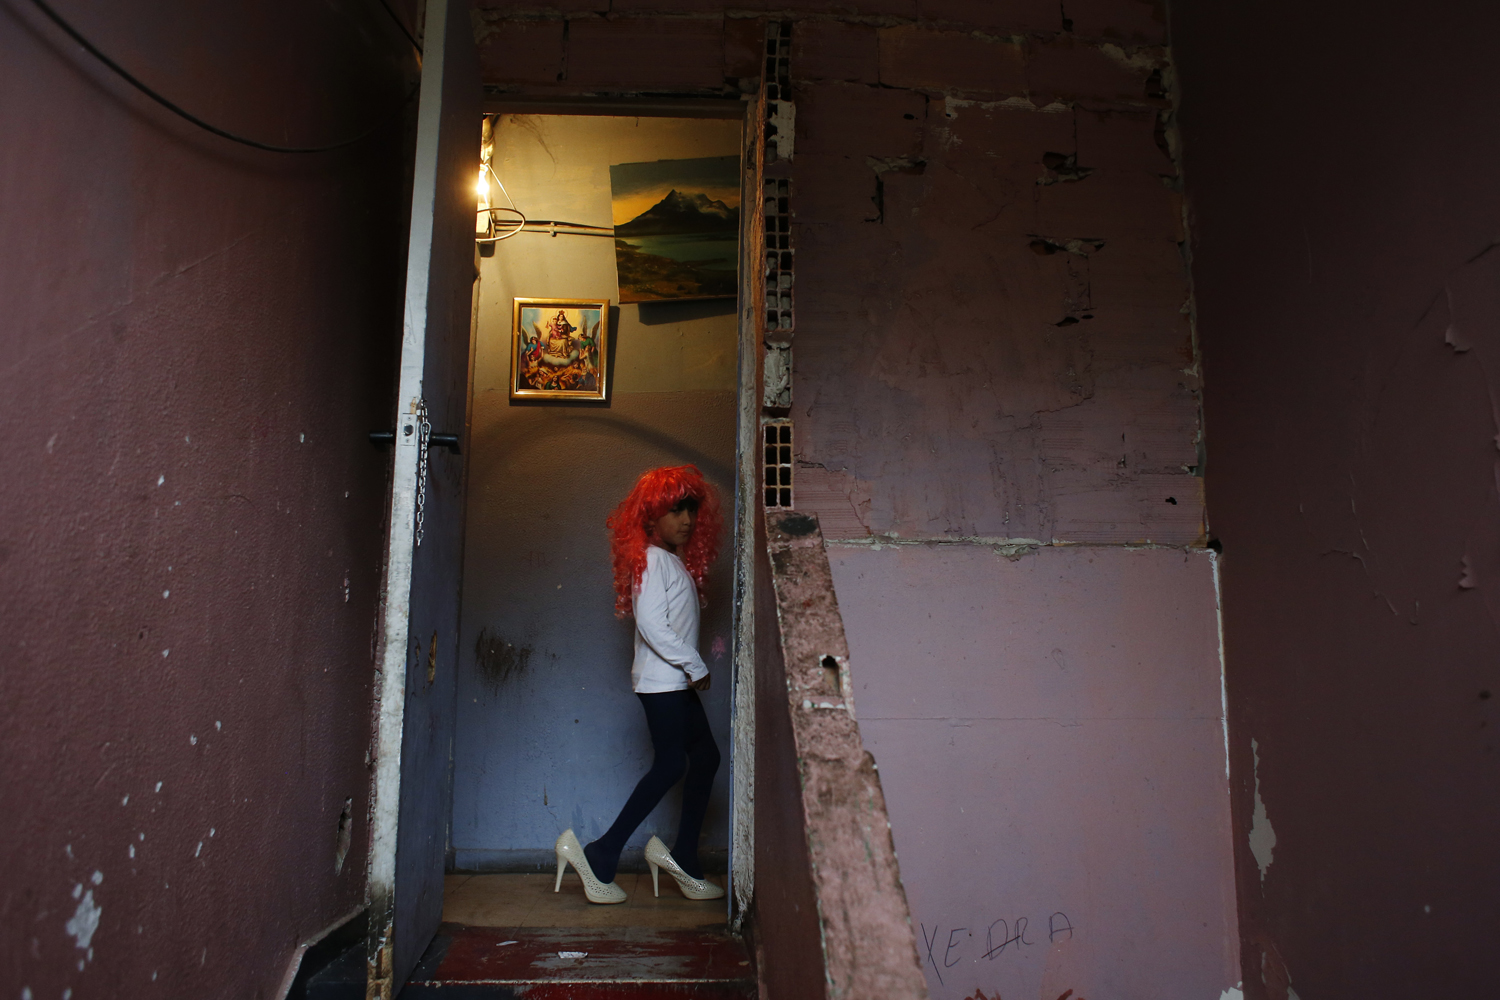 Antonio Acuna plays dress up with a wig and high heel shoes at the factory where he lives with his family after the postponement of the demolition of their homes in Madrid